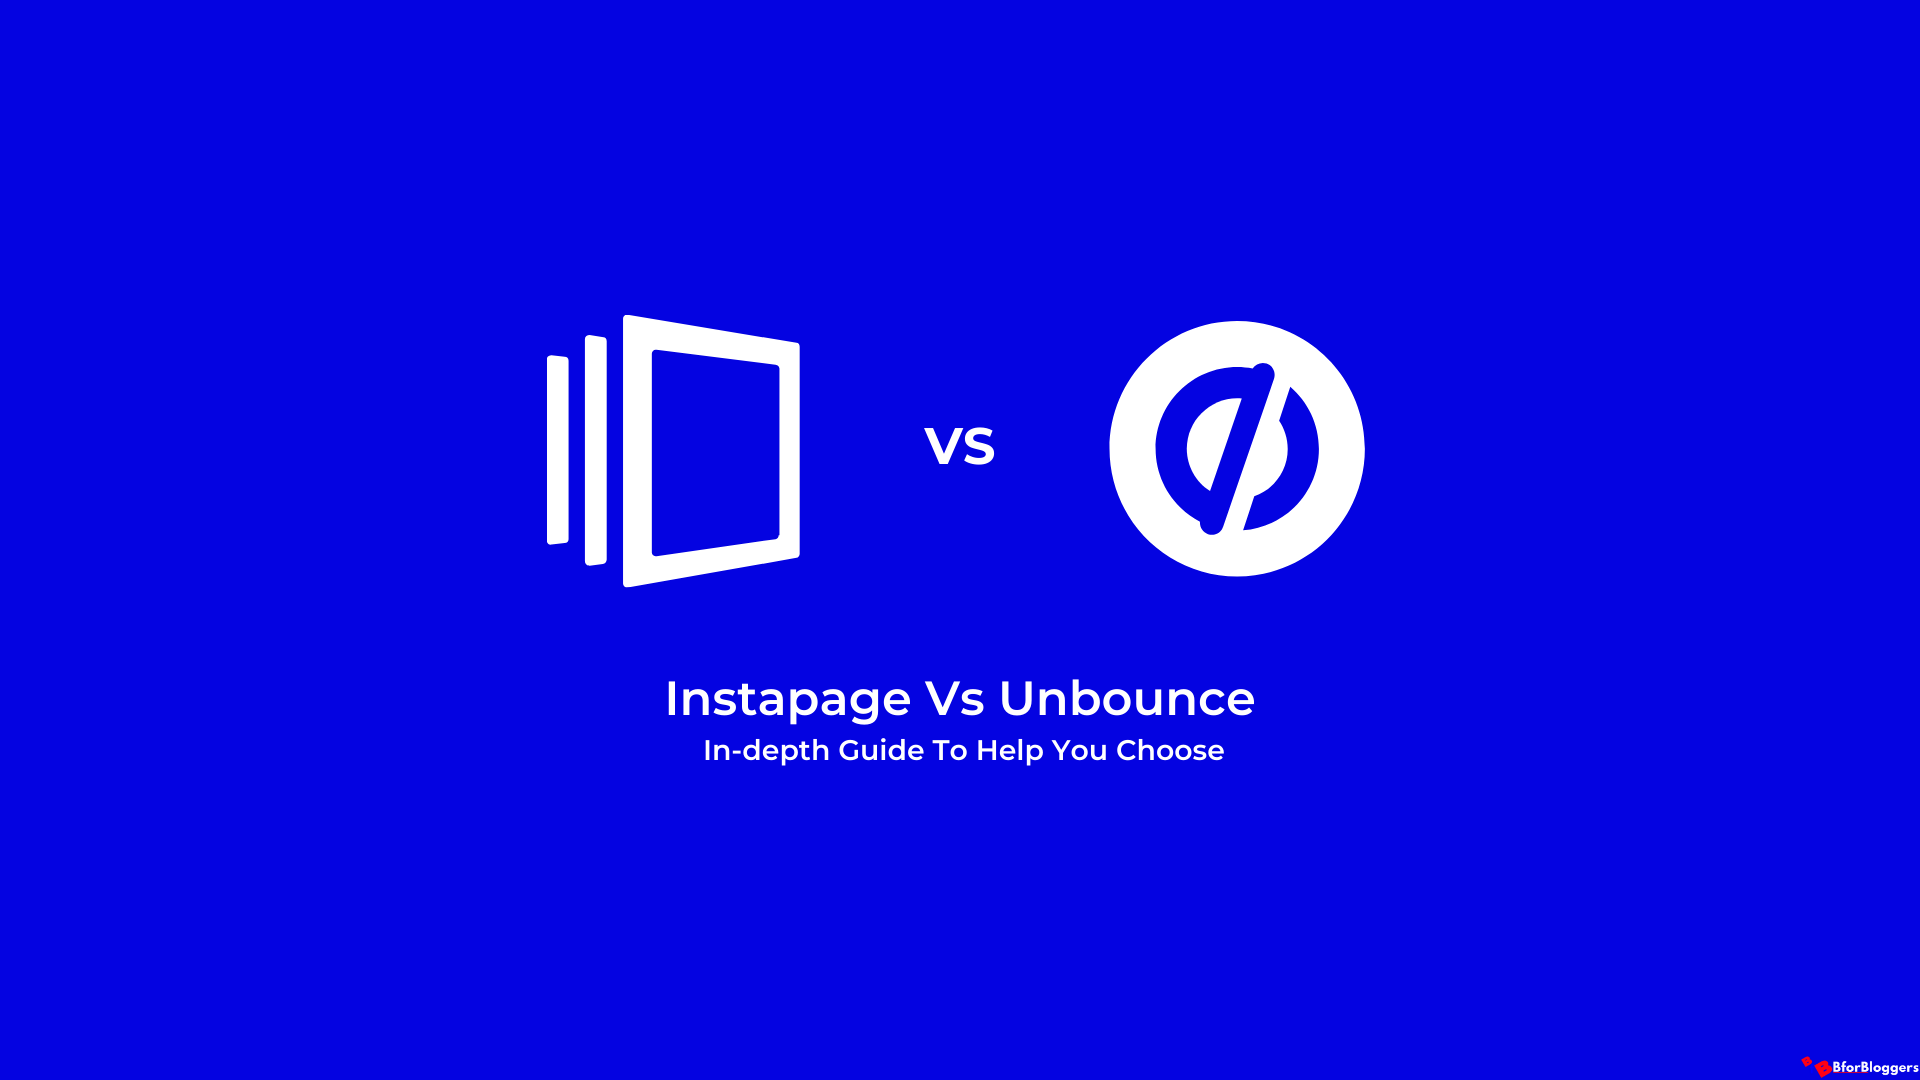 Instapage vs Unbounce: Compared